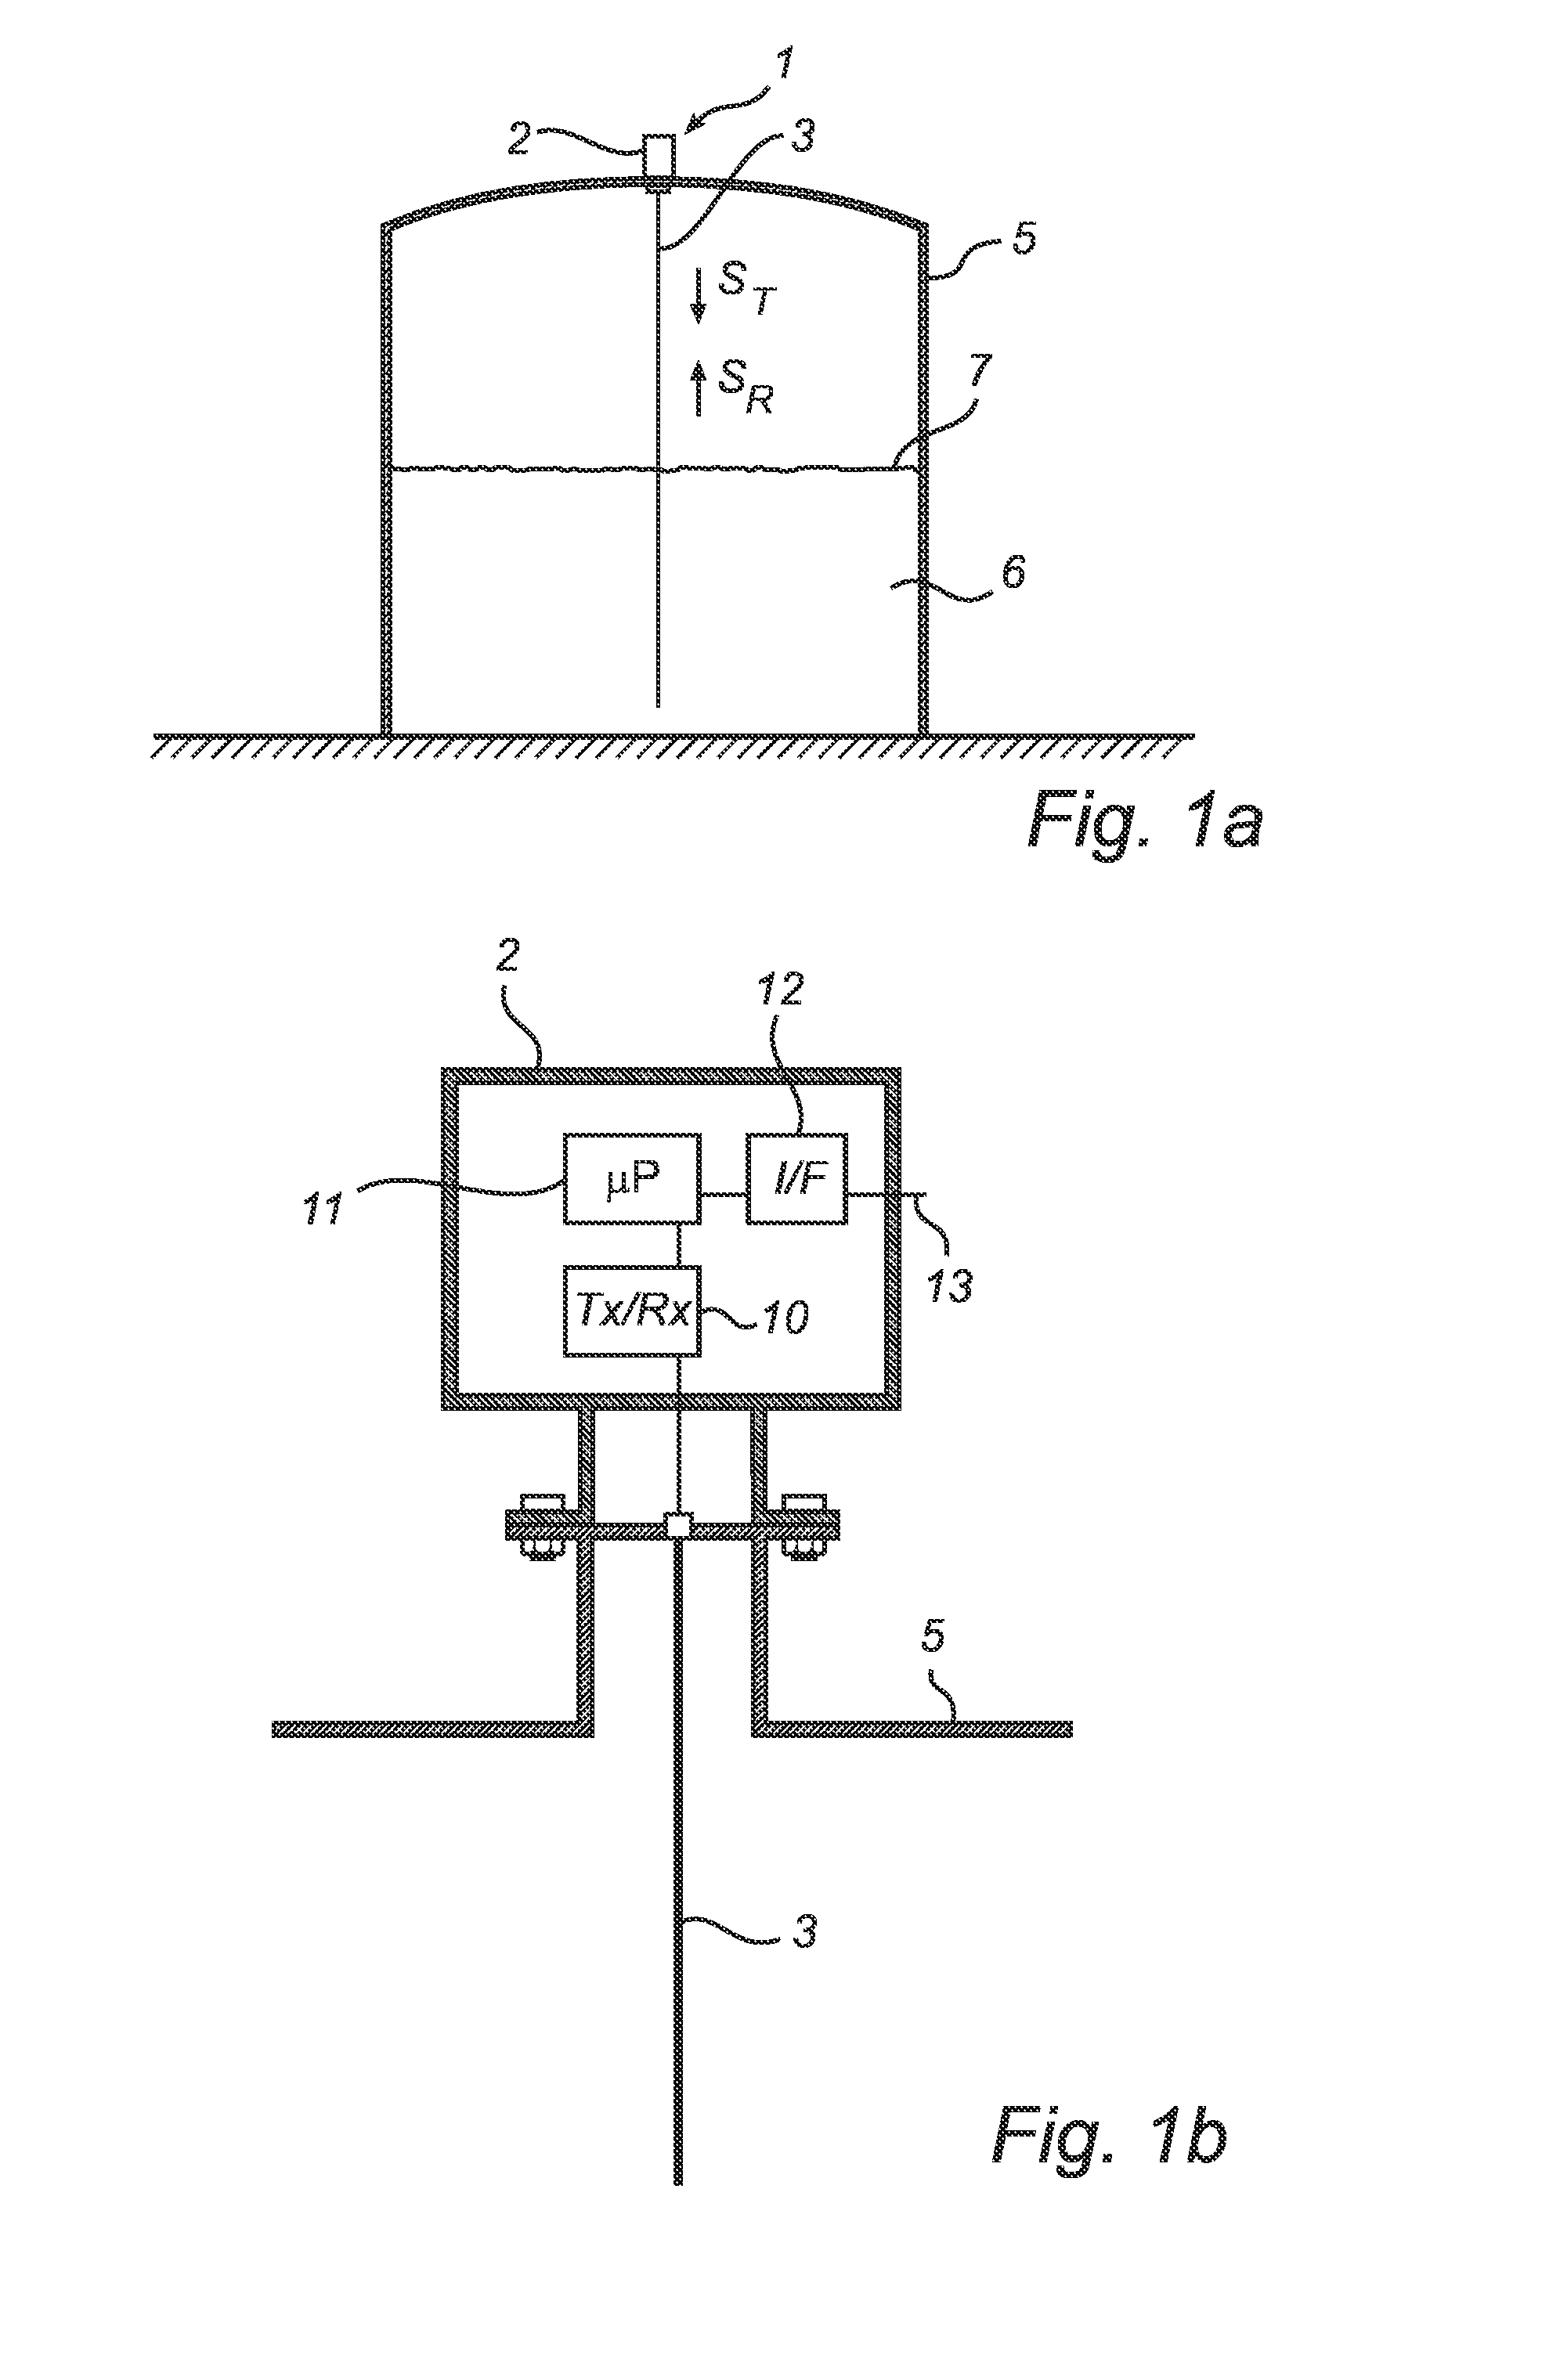 Radar level gauge system using a waveguiding structure with periodically arranged reference impedance transitions